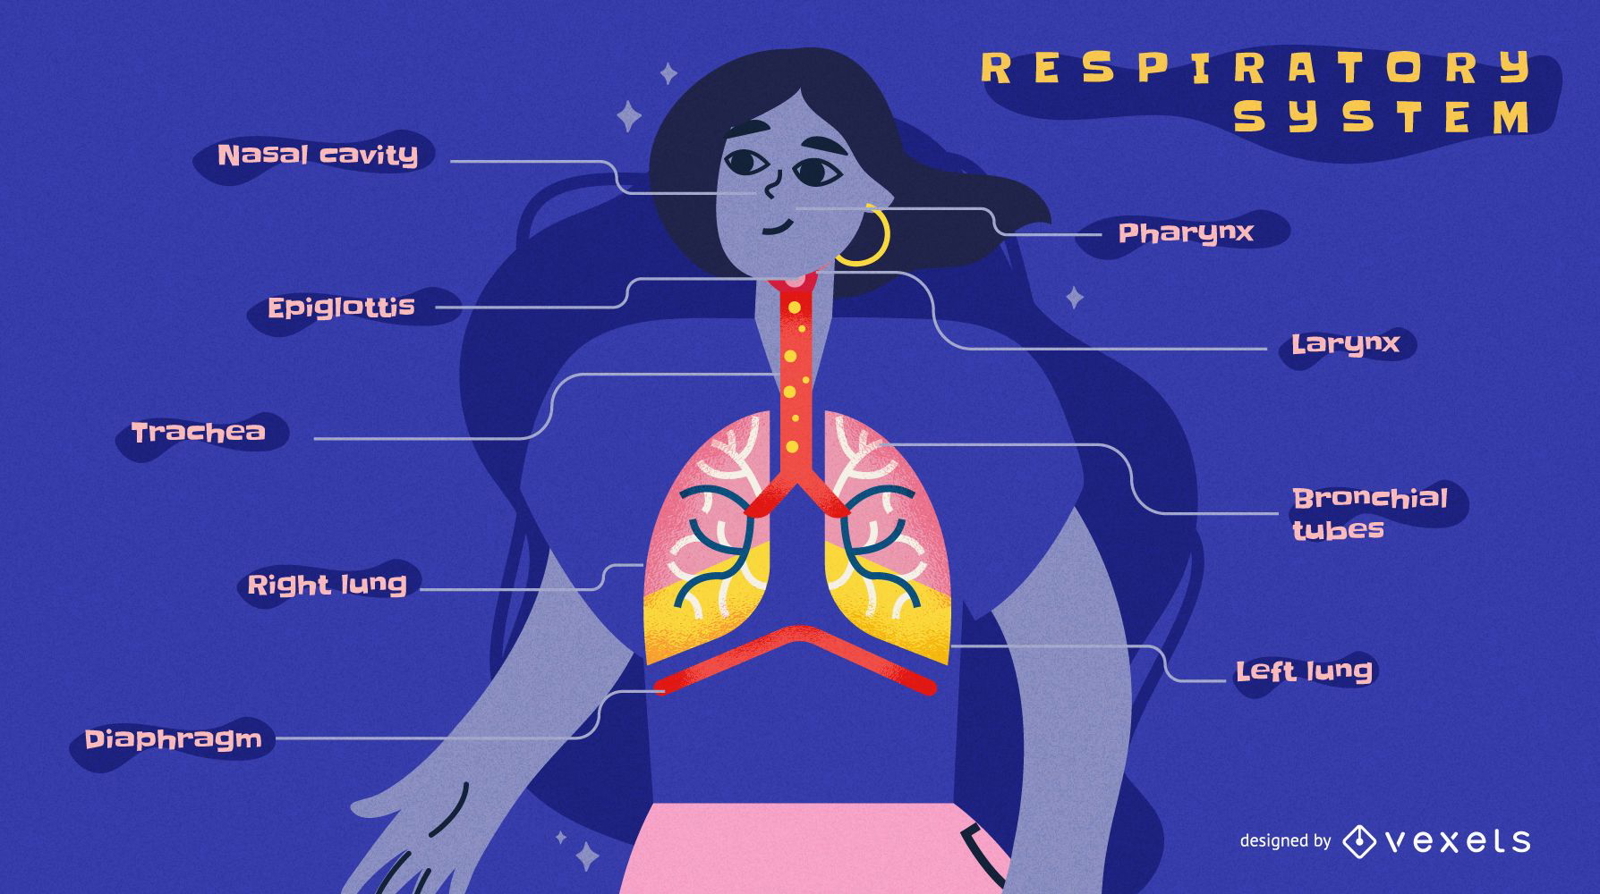 Respiratory system infographic template